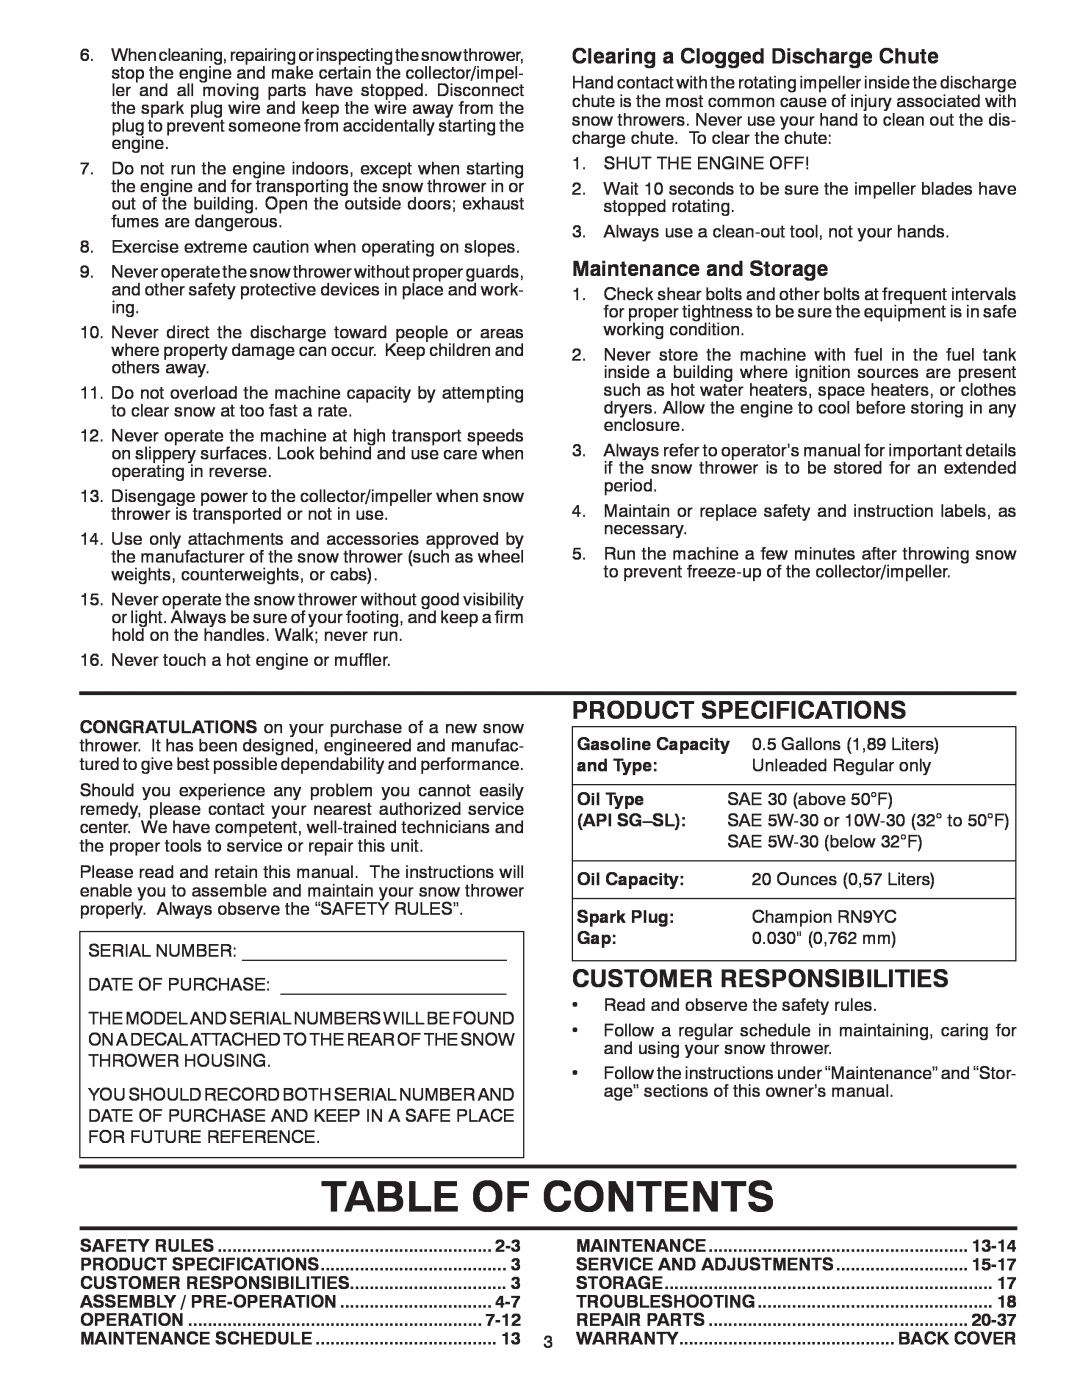 Poulan 421888 Table Of Contents, Product Specifications, Customer Responsibilities, Clearing a Clogged Discharge Chute 